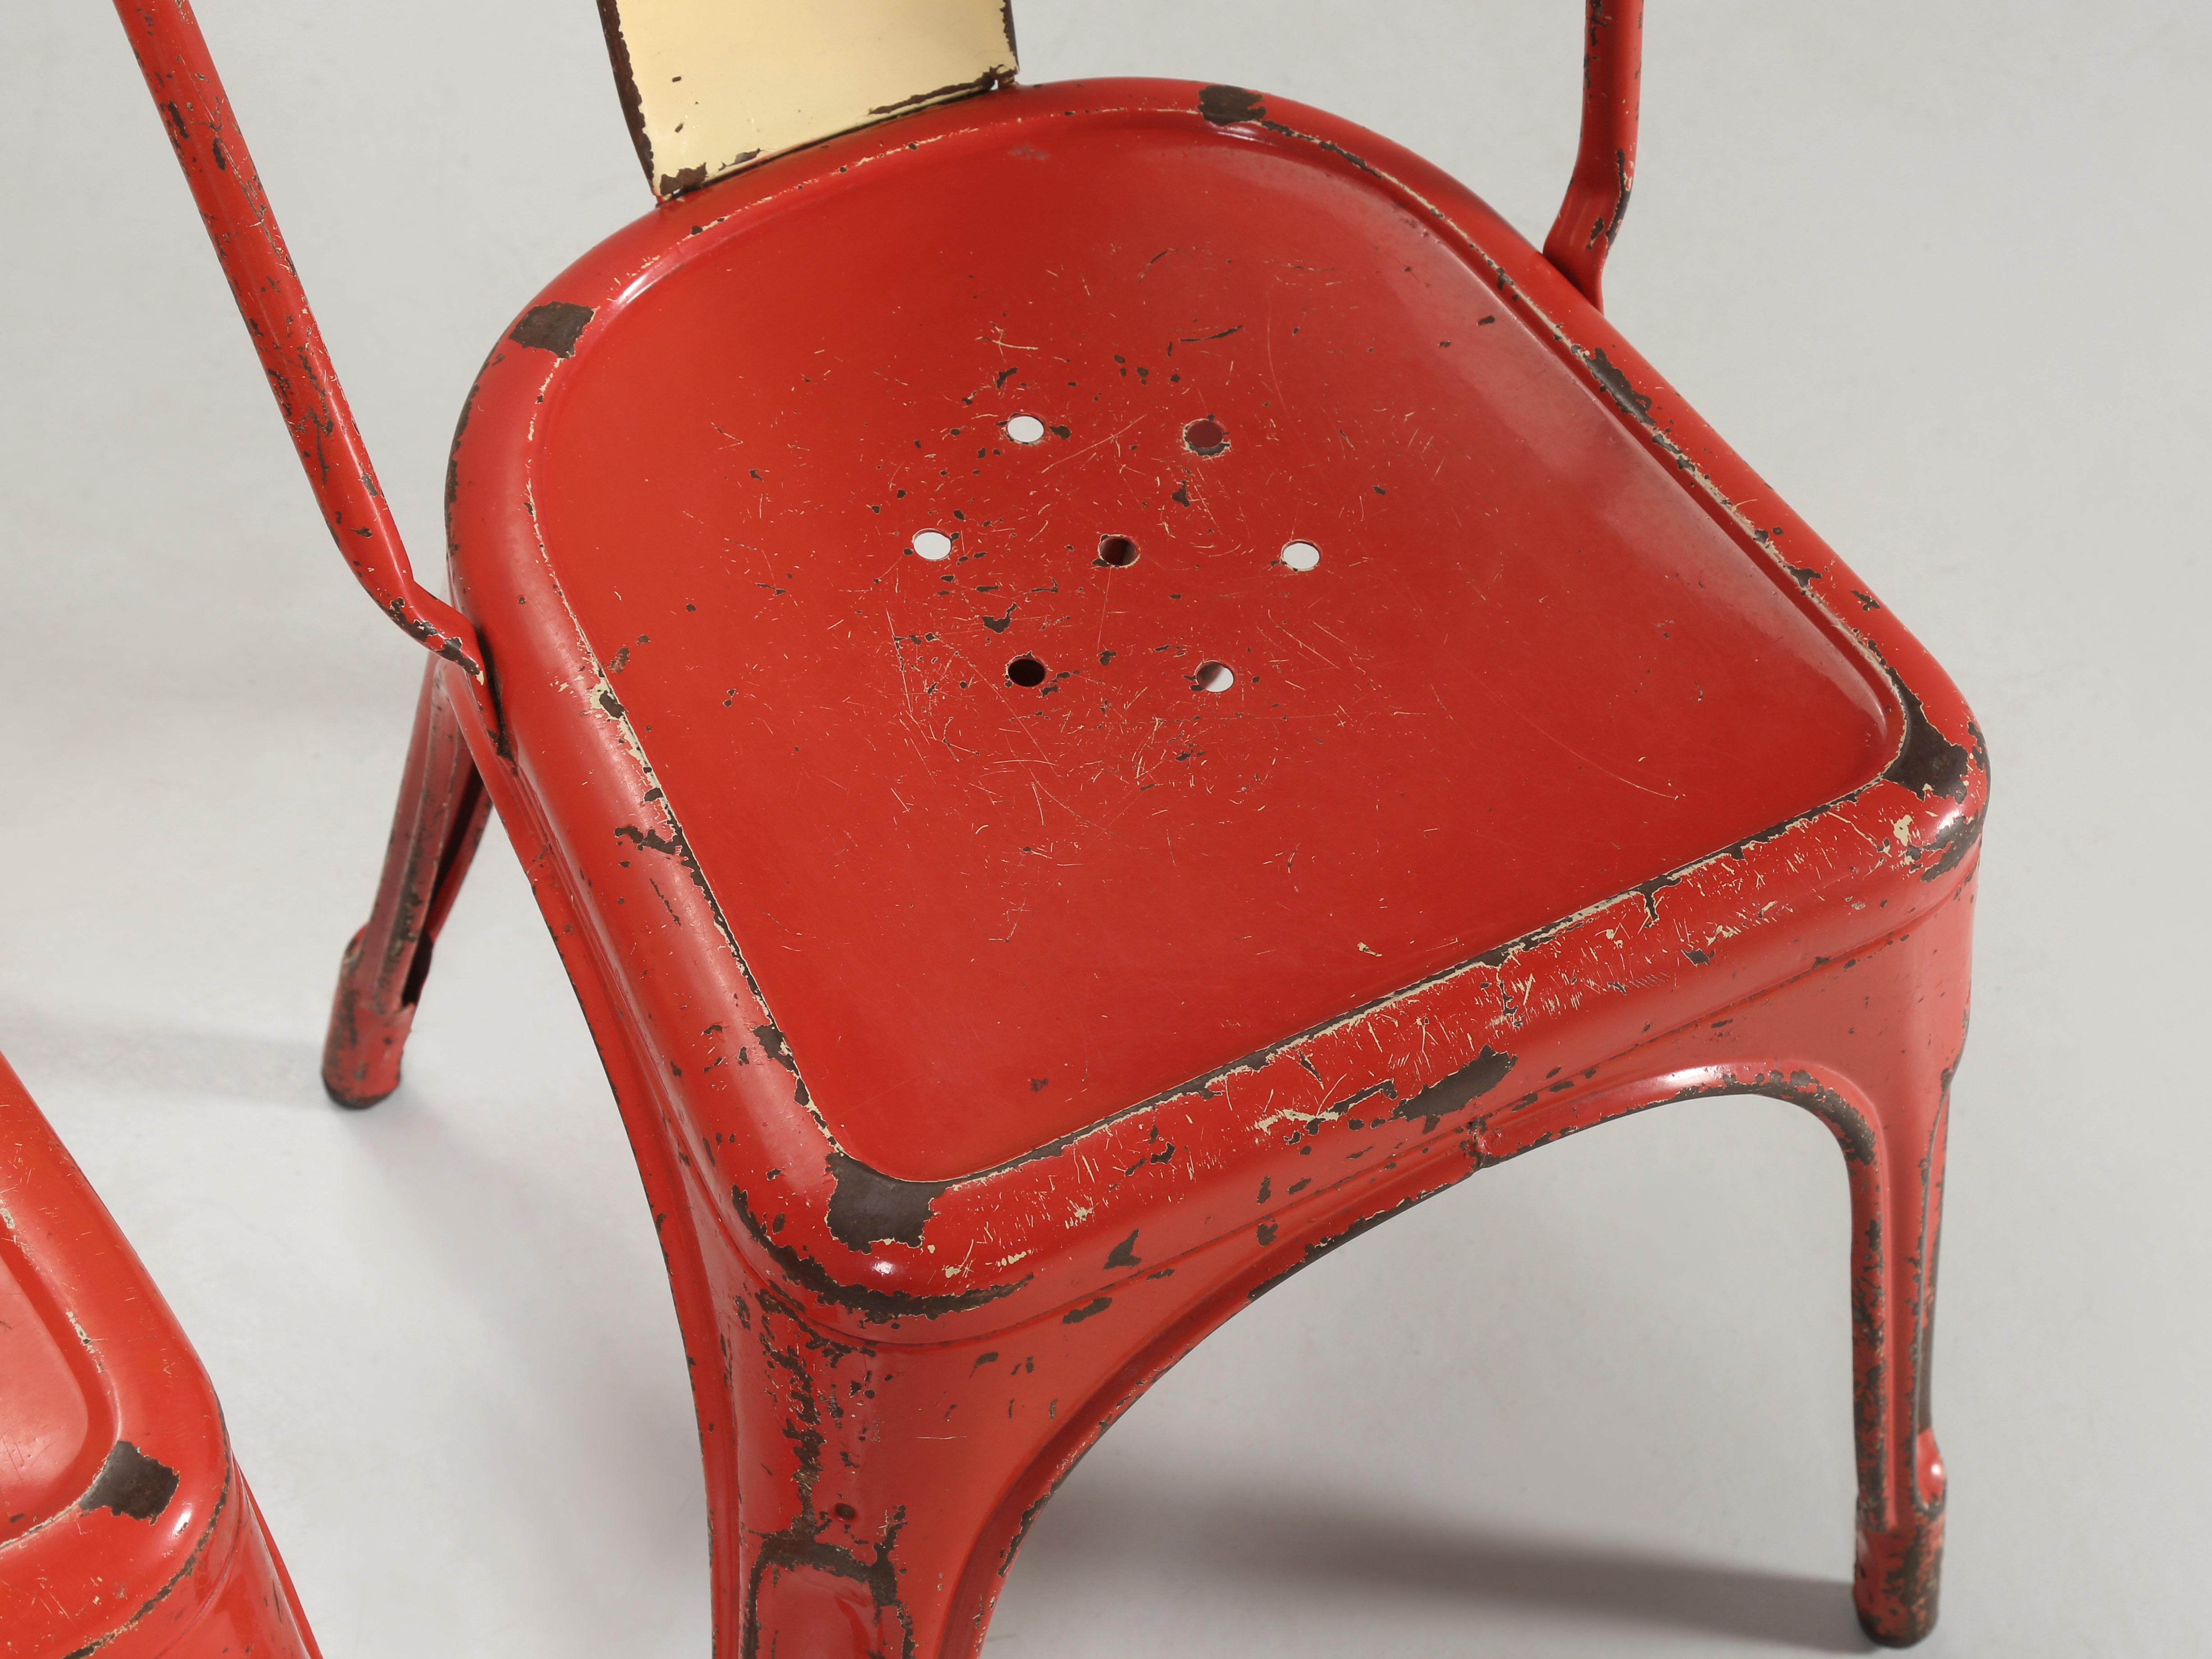 Hand-Crafted Vintage Authentic Original Paint Tolix Chairs c1950's Large Quantity Available For Sale